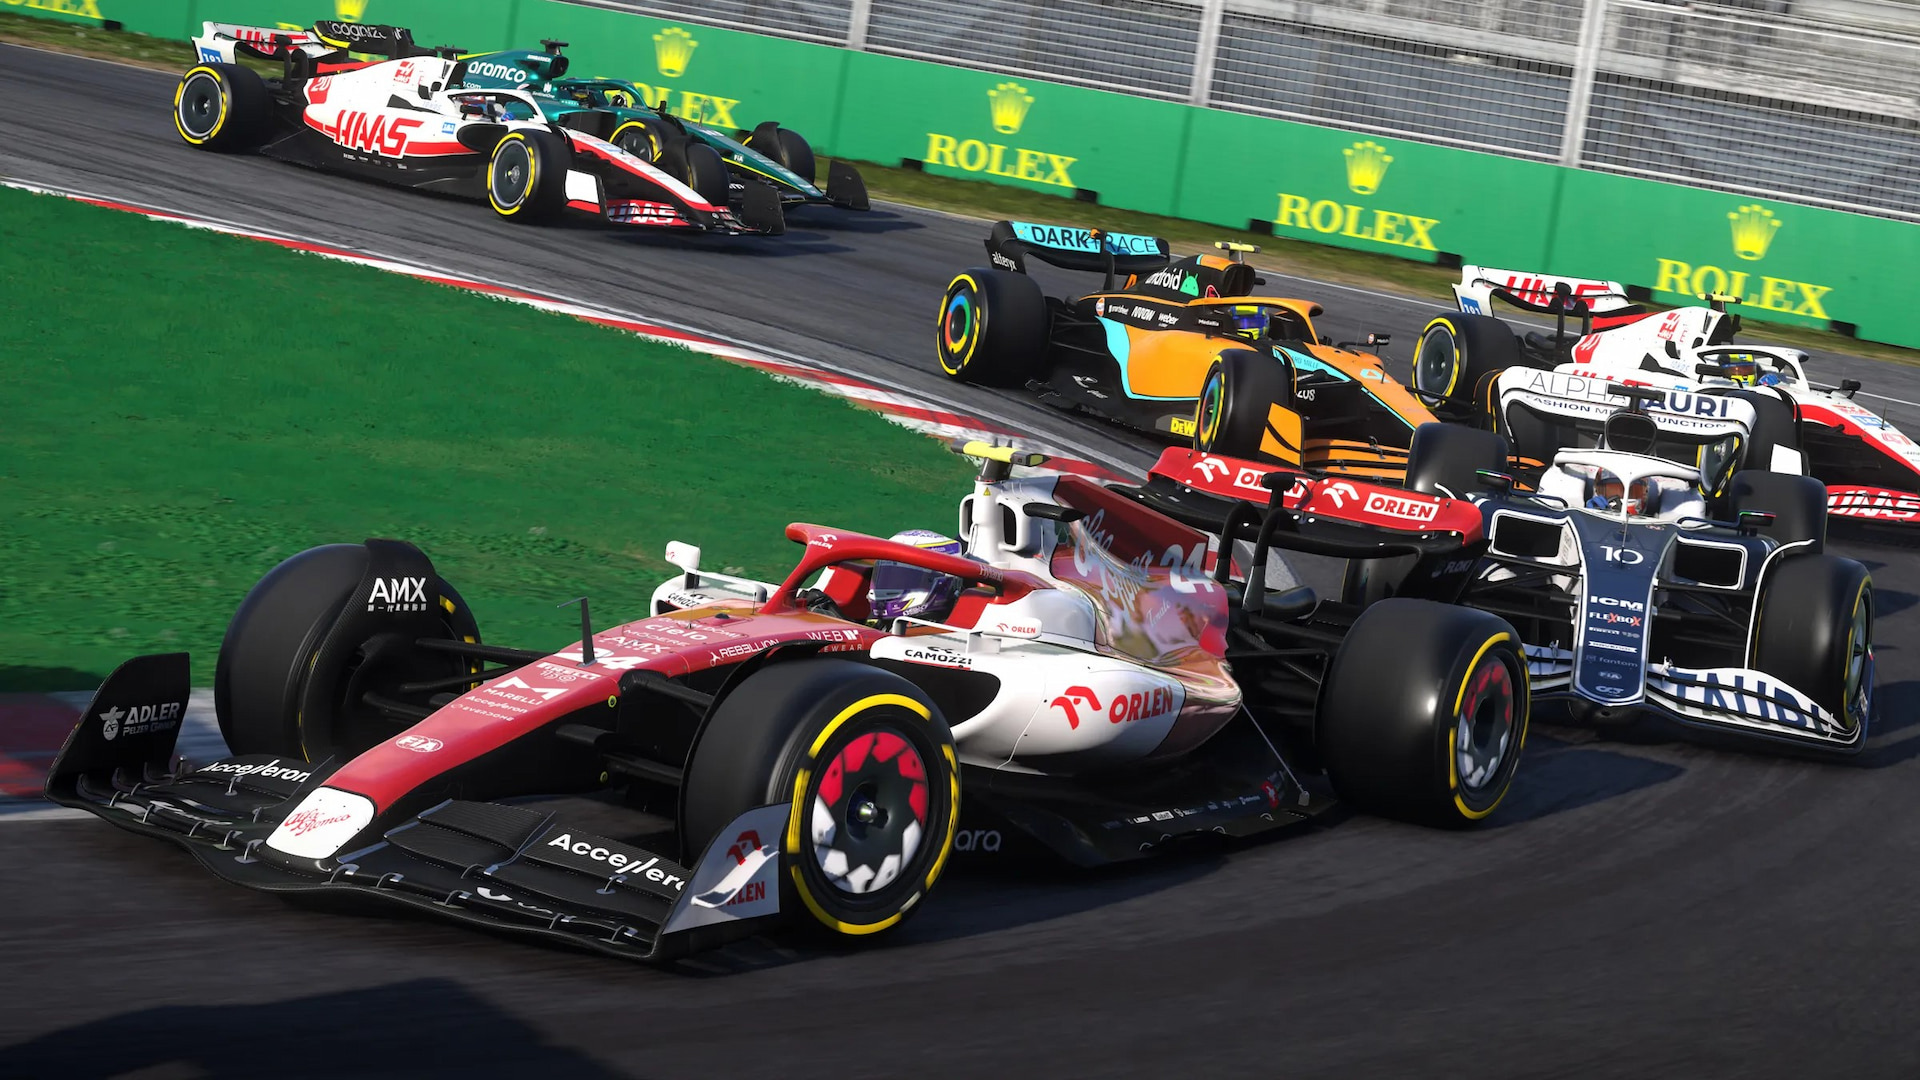 F1 23 Details Include New F1 World Hub, Car Upgrades, And More